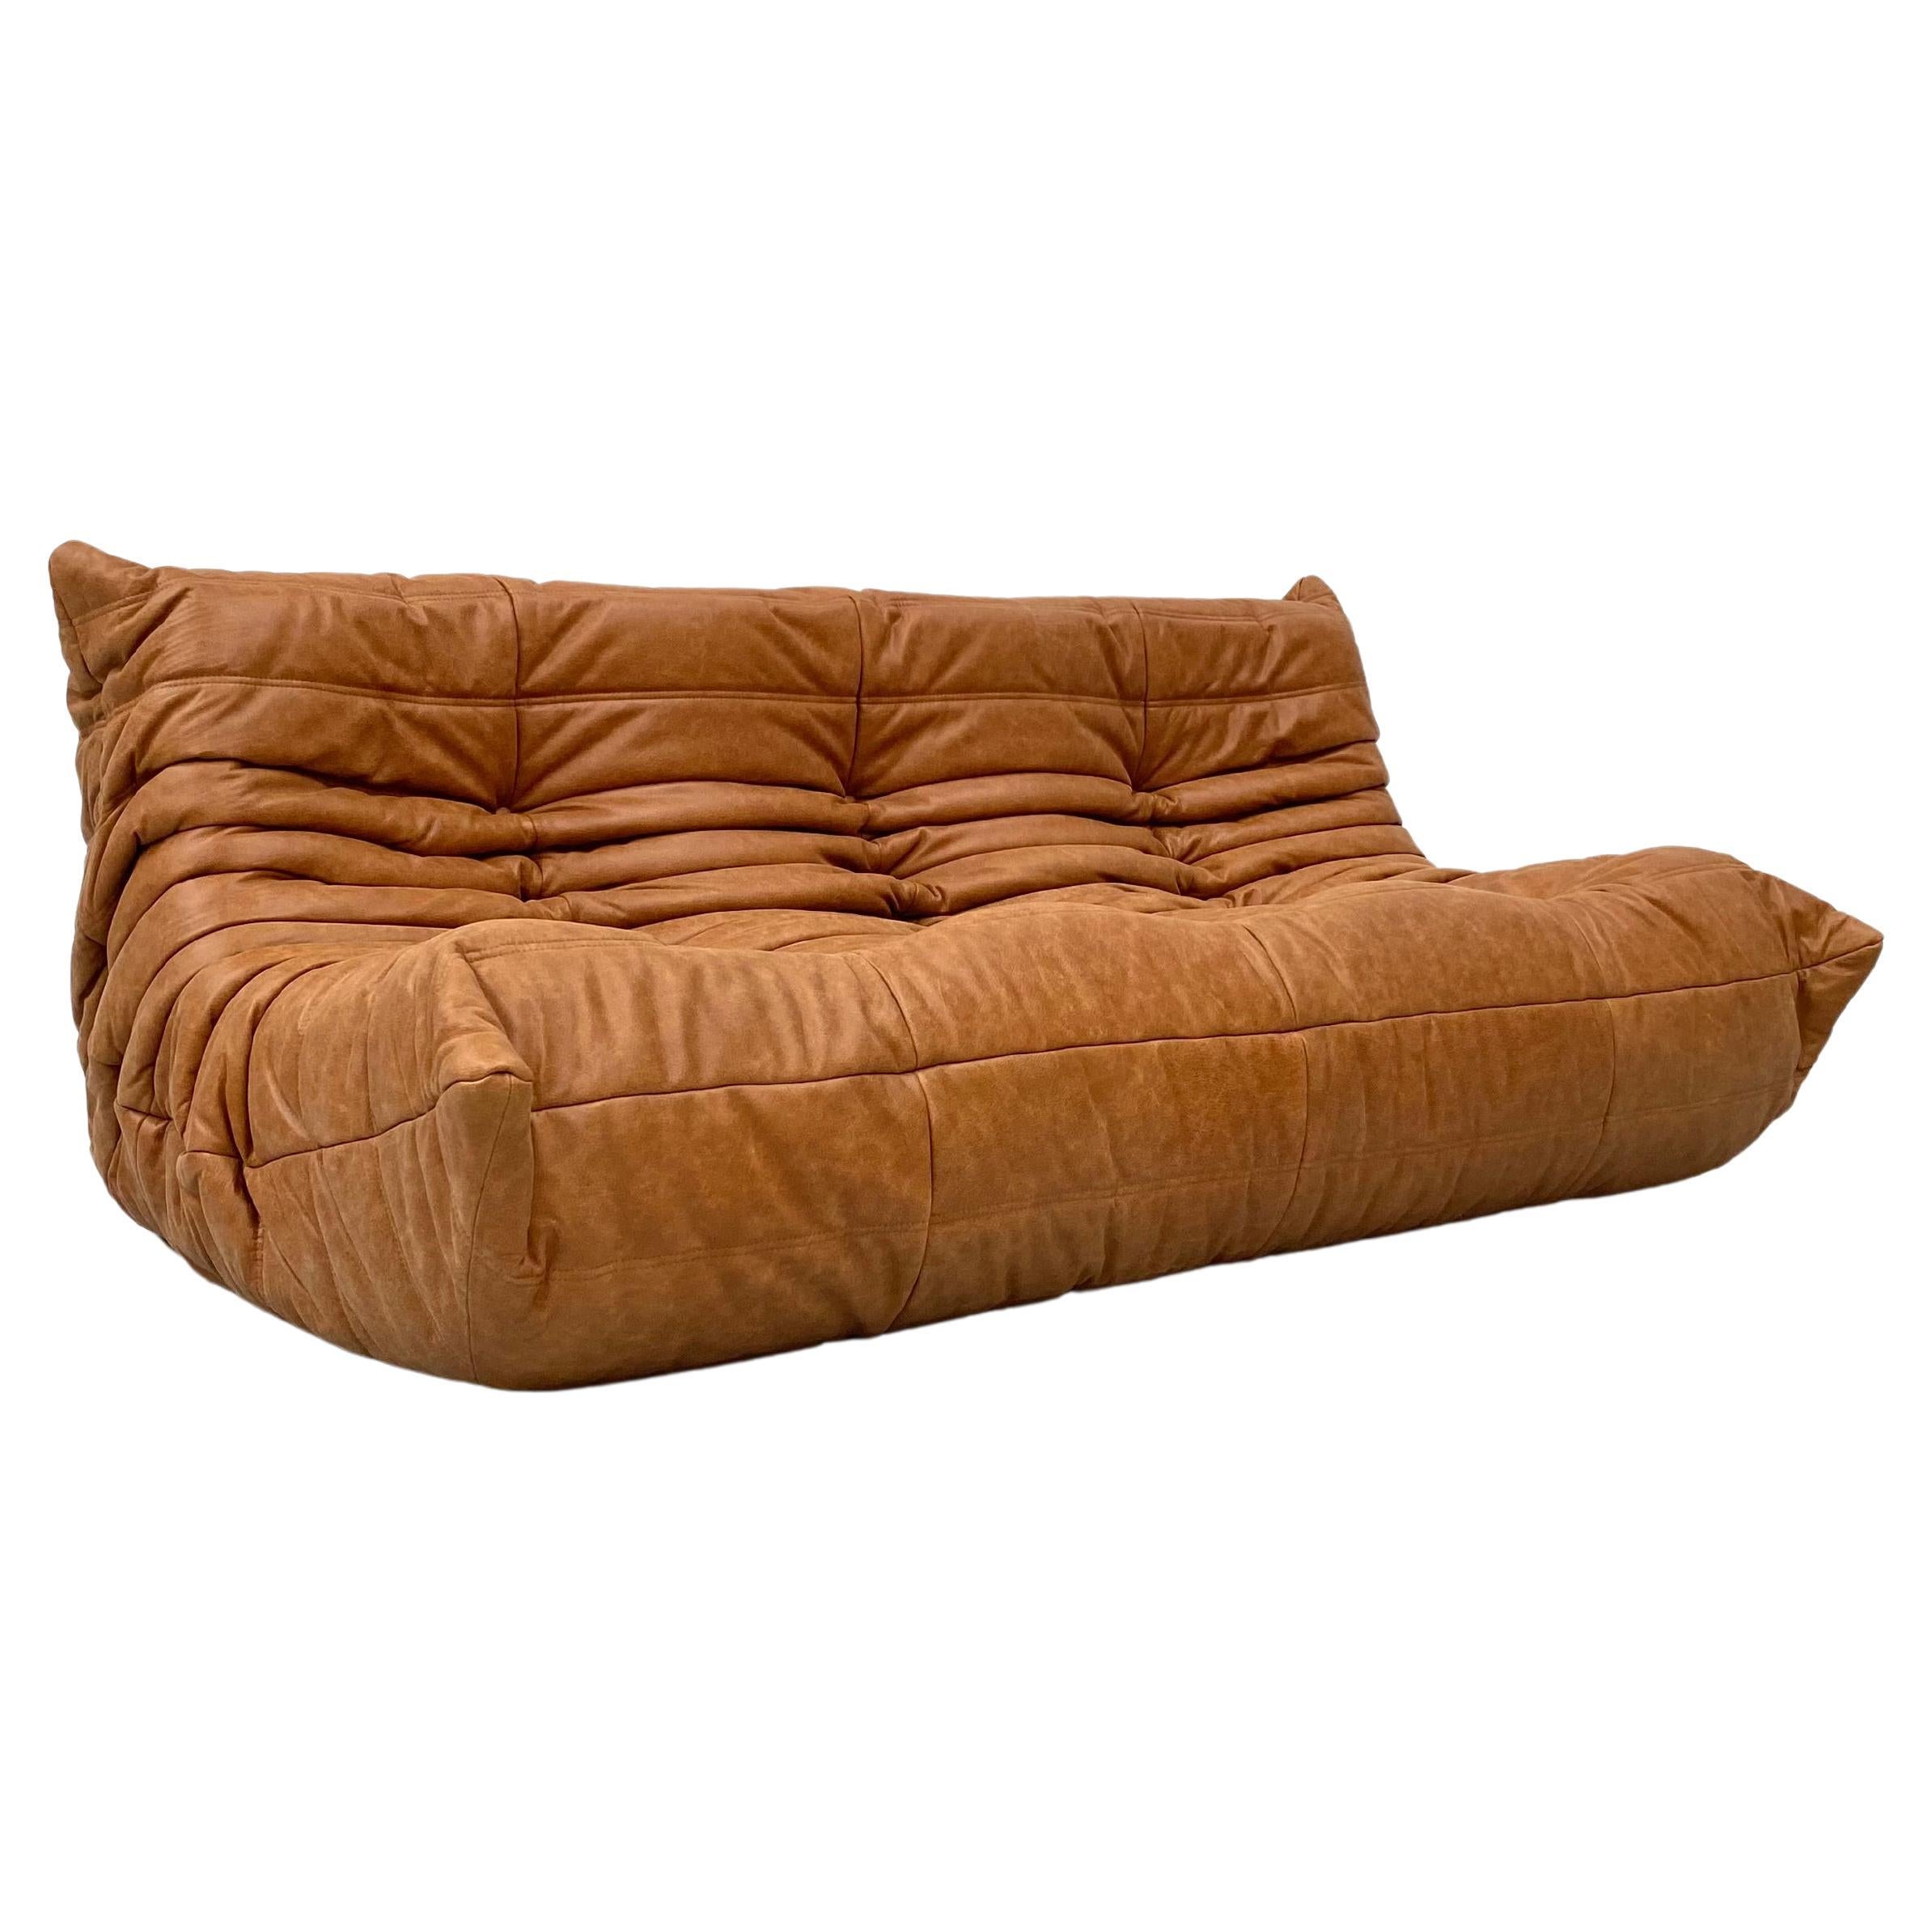 Vintage French Togo Sofa in Cognac Leather by M. Ducaroy for Ligne Roset, 1970s